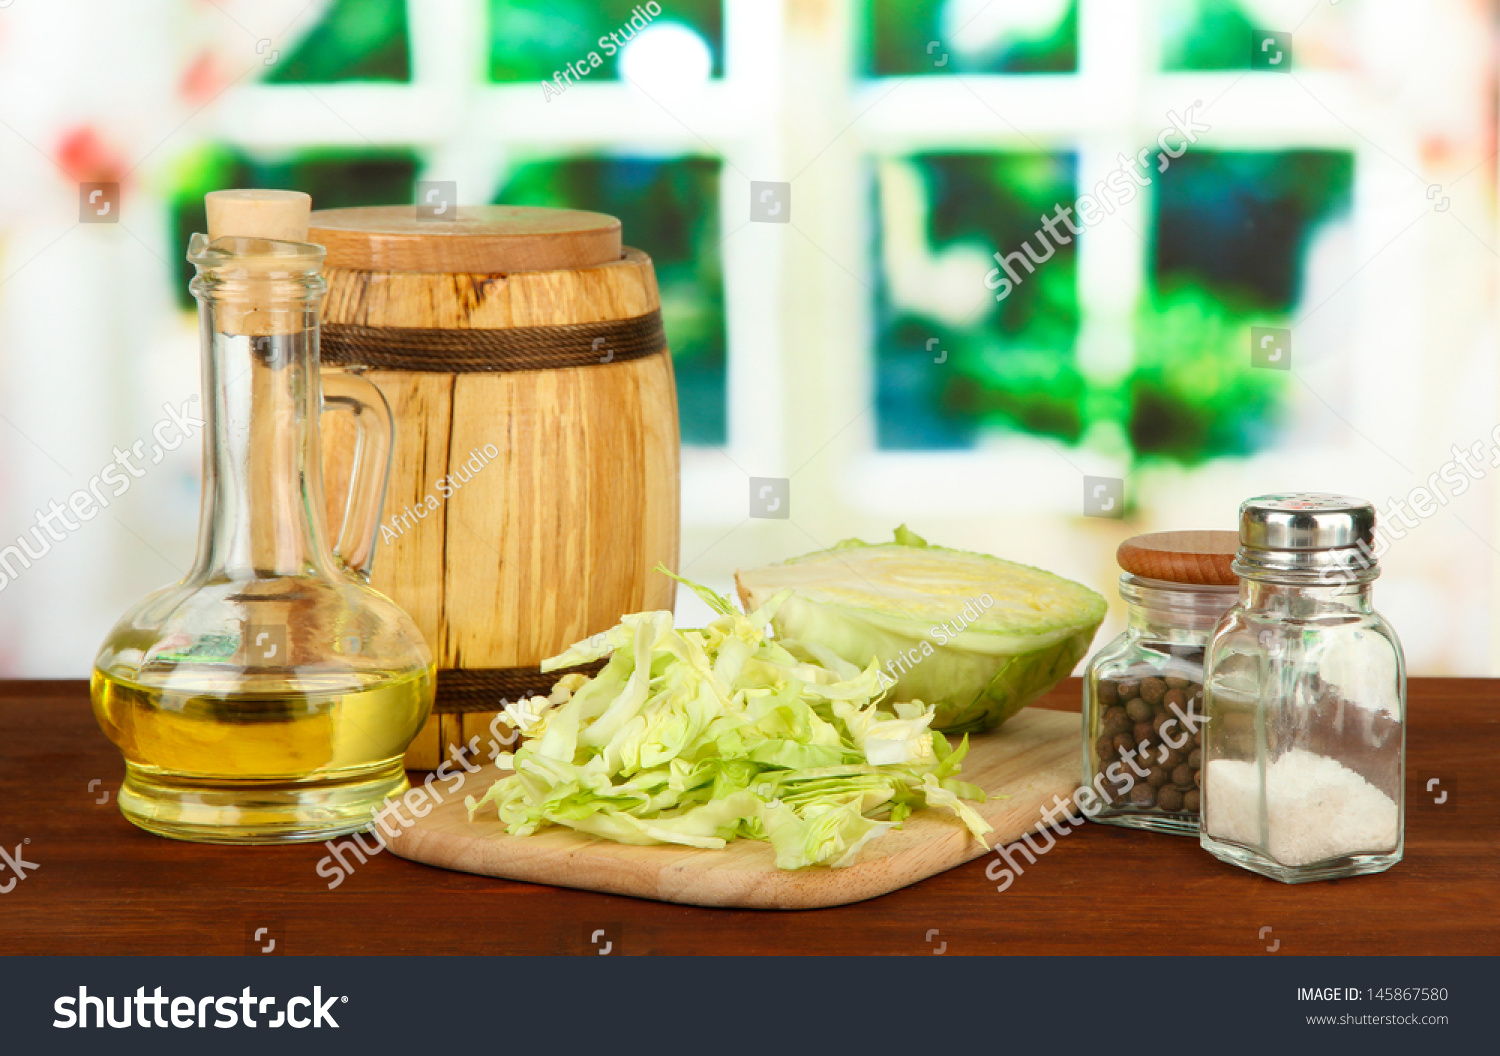 Green cabbage, oil, spices on cutting board, on bright background #145867580